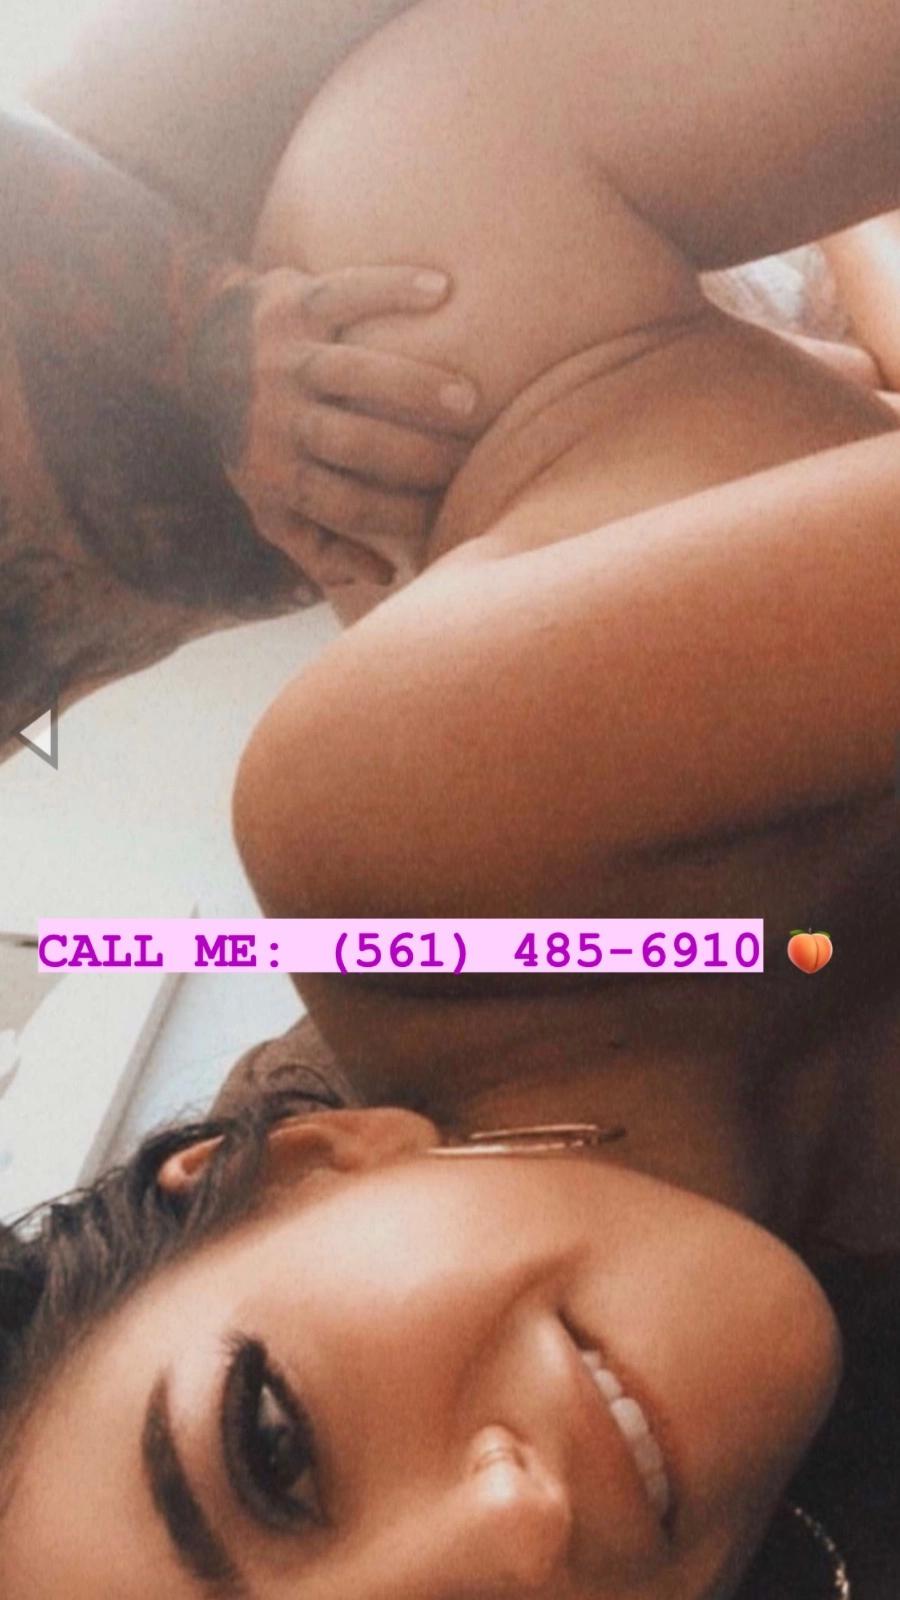 PAY CASH 100% 🍡REAL 100%🍑CALL ME FOR FU’CK📞(561) 485-6910 AVALIABLE TONIGHT